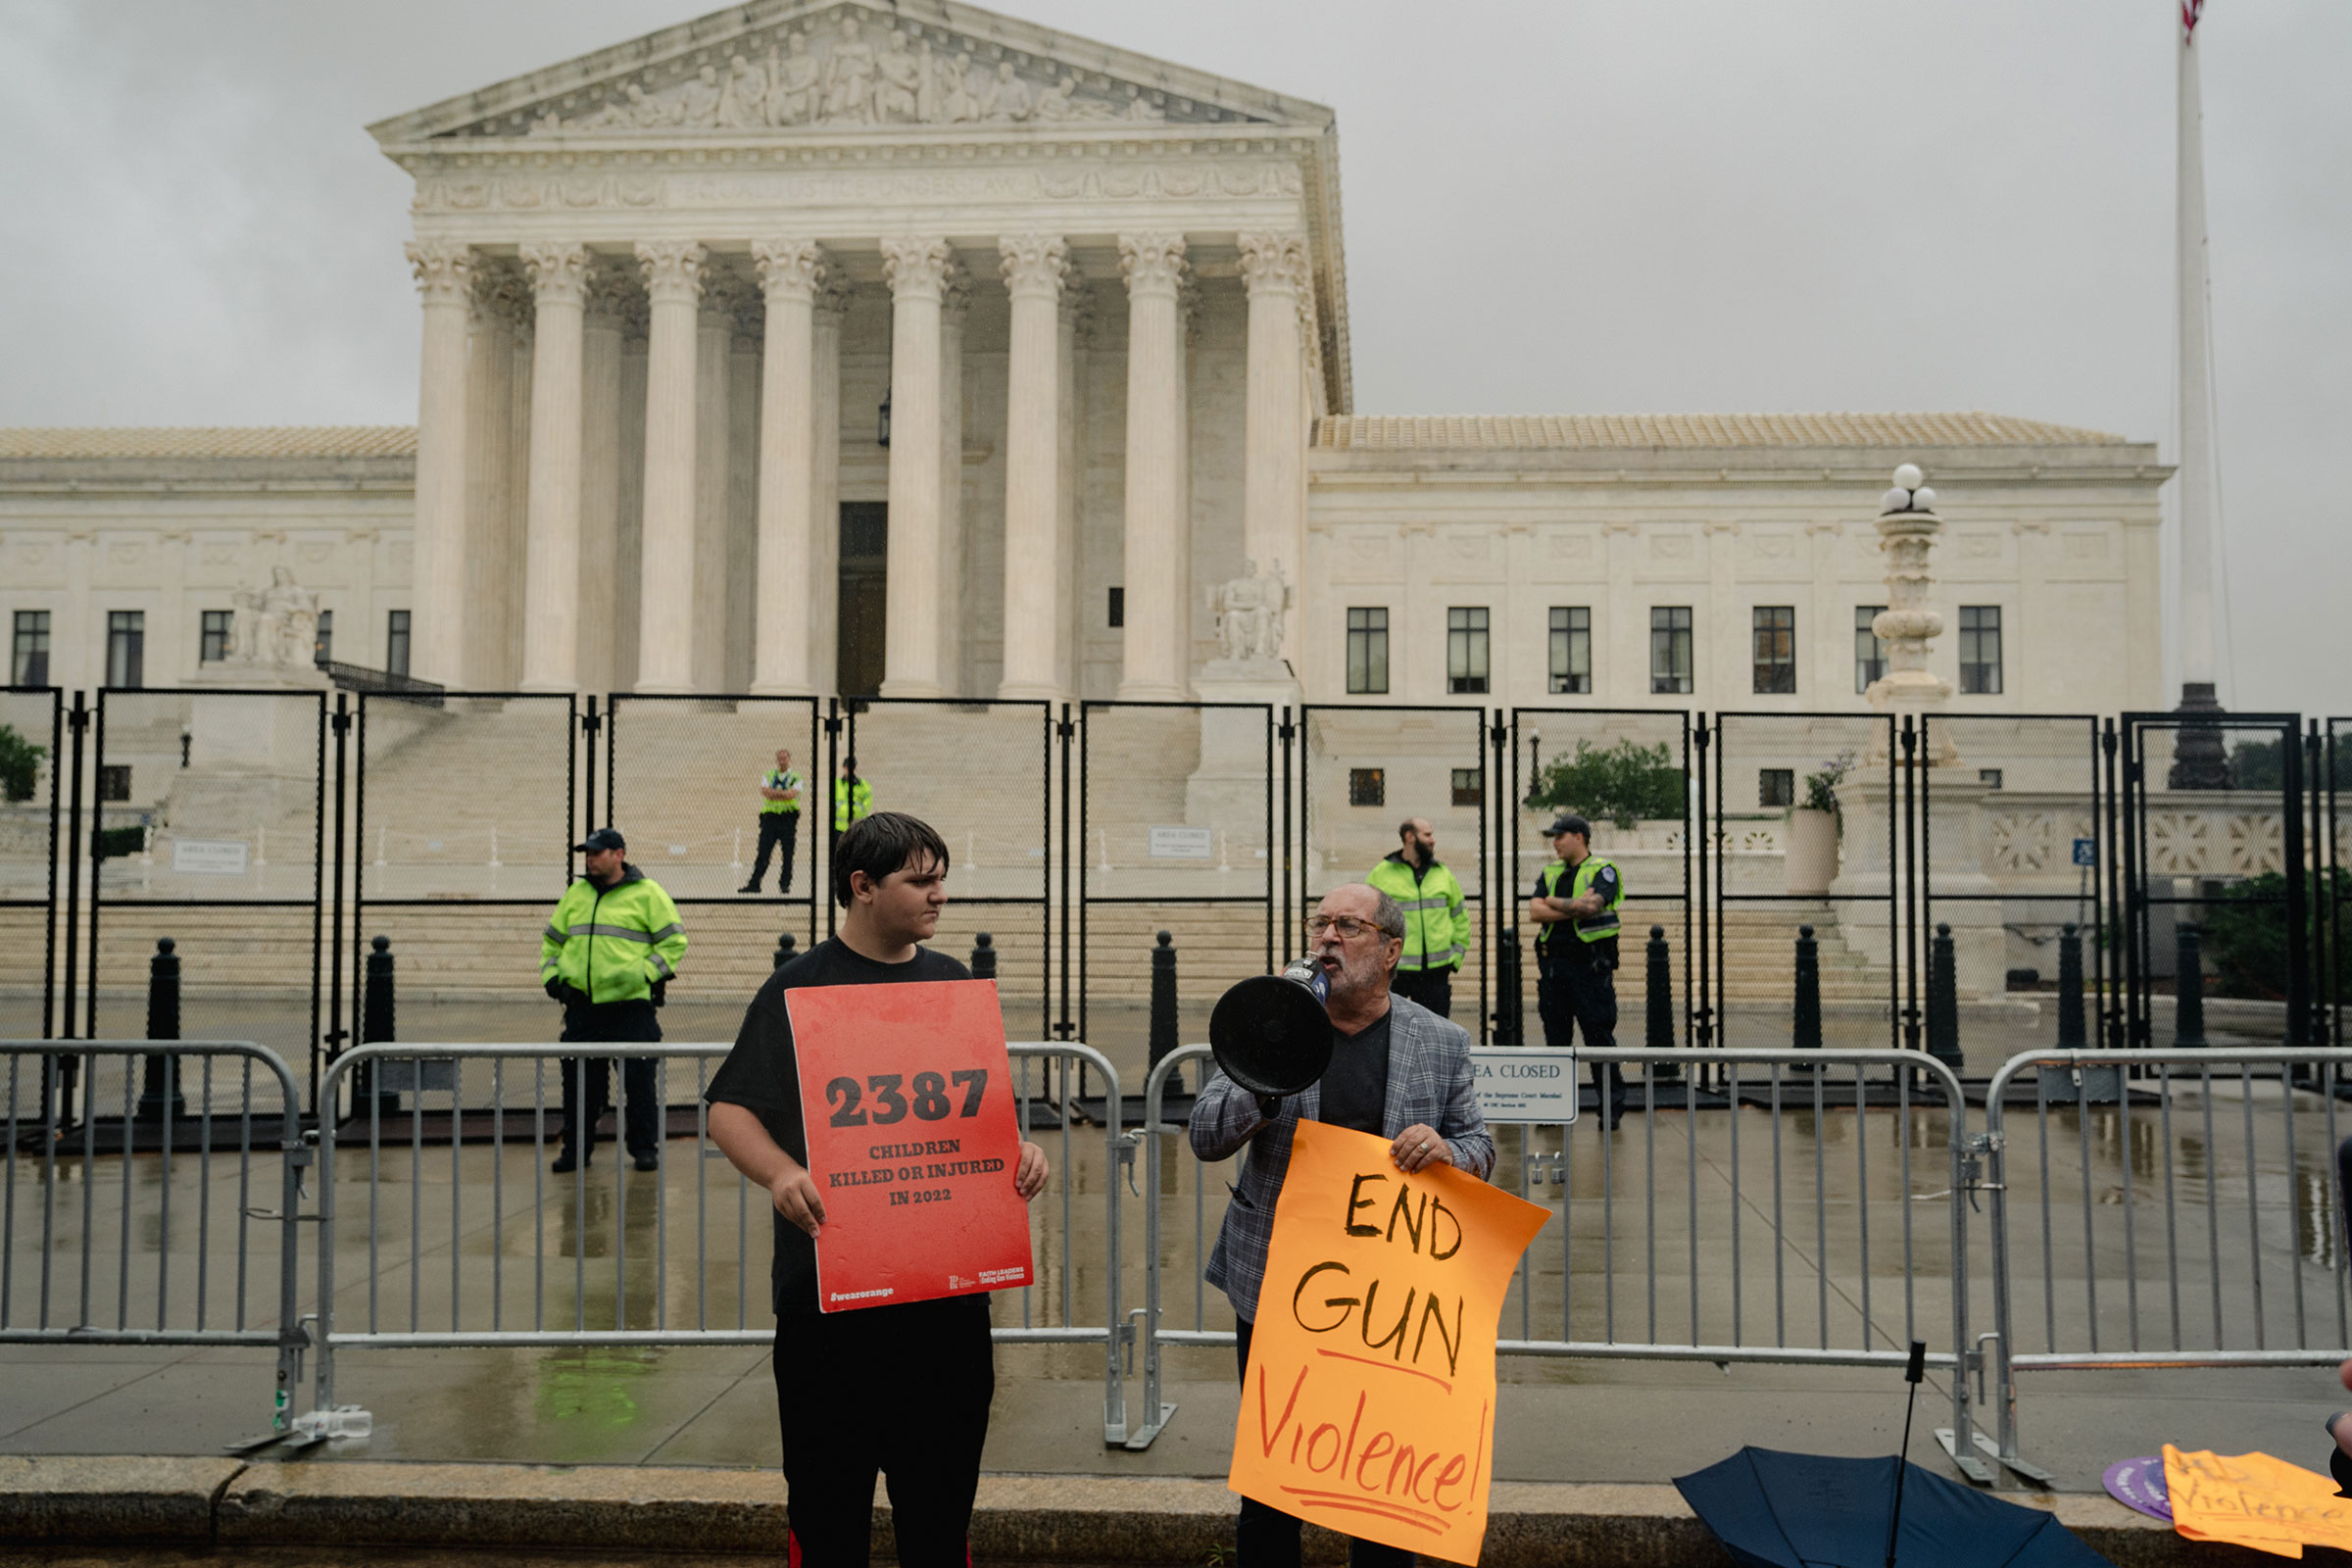 Supporters of gun control control demonstrate outside the U.S. Supreme Court Building on June 23, 2022 in Washington, DC. Decisions are expected in 13 more cases before the end of the Court's current session. (Photo/Shuran Huang)